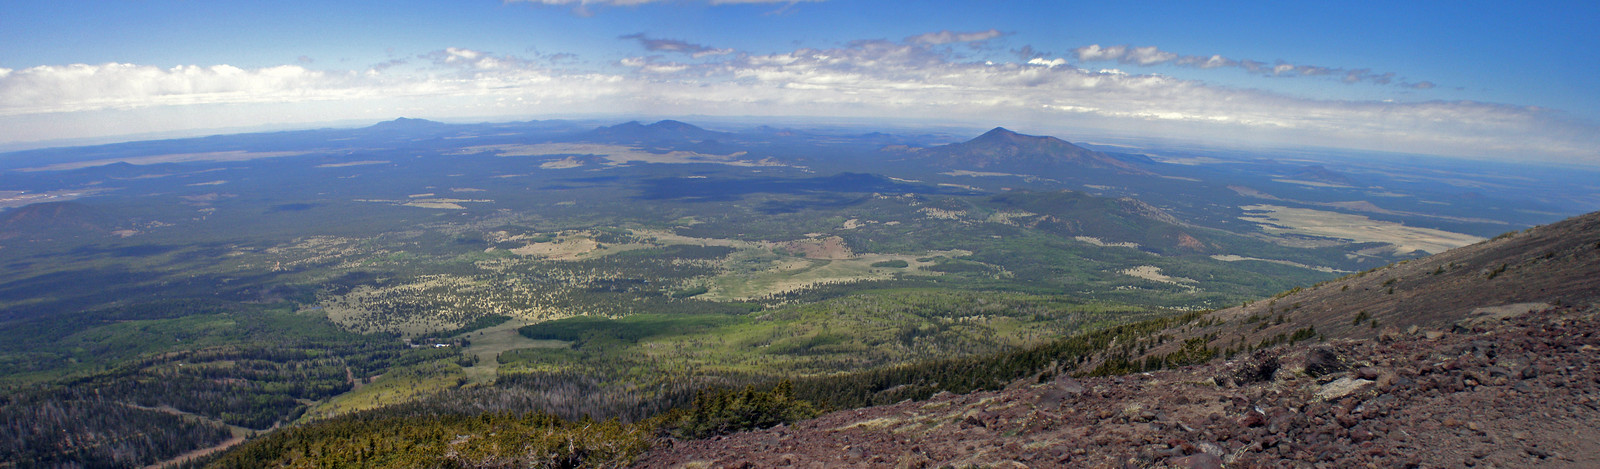 Panorama of Coconino National Forest seen from Humphreys Peak